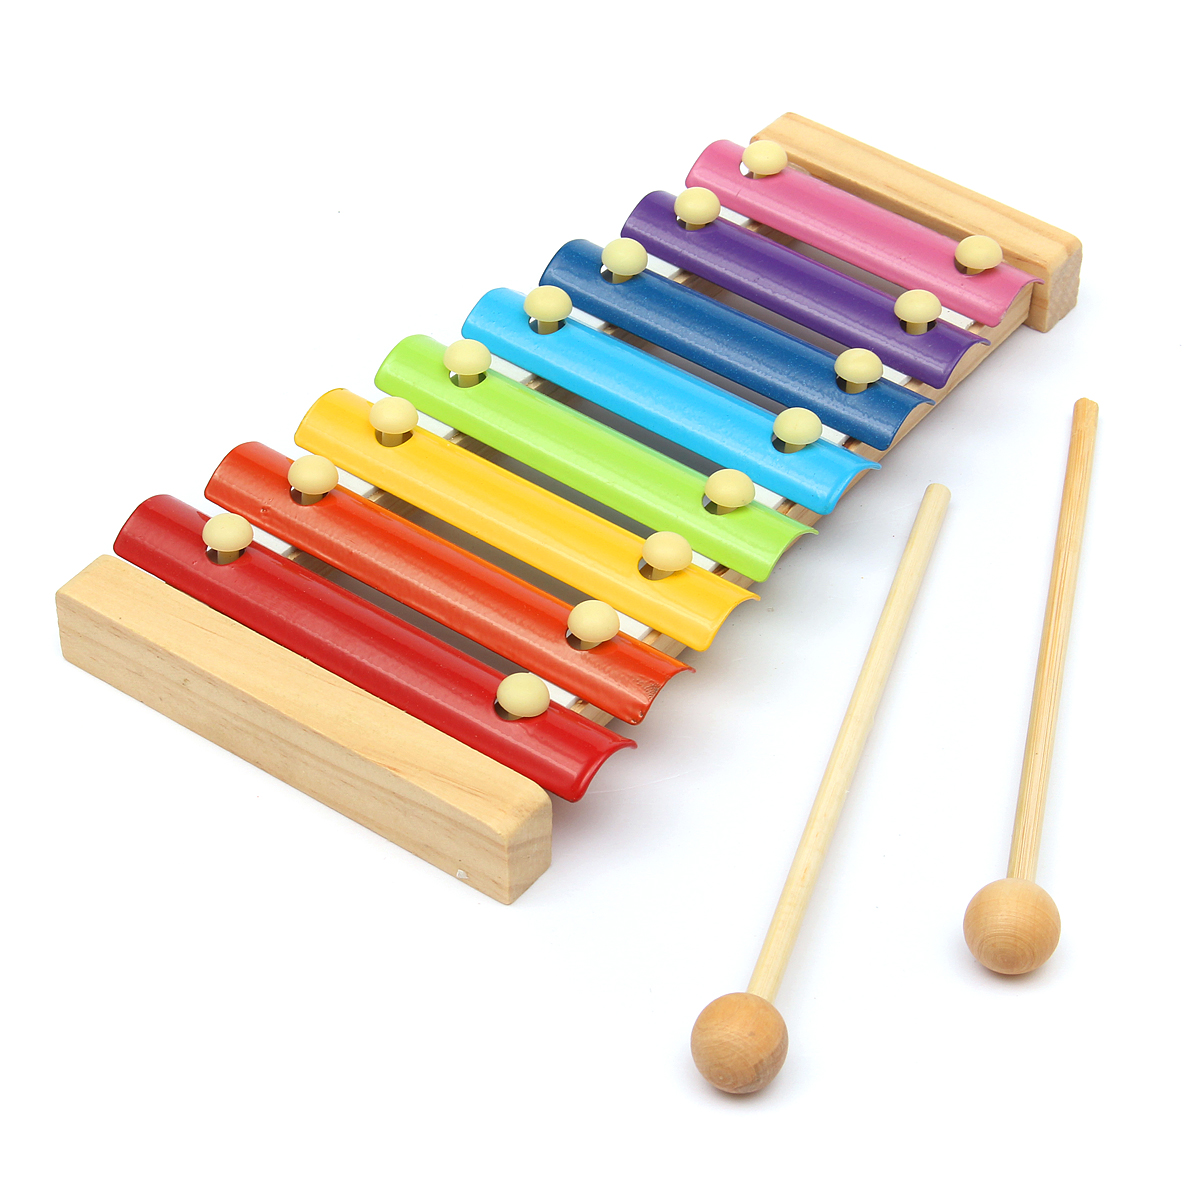 Kids Toys 8 Notes Musical Xylophone Piano Wooden Instrument For